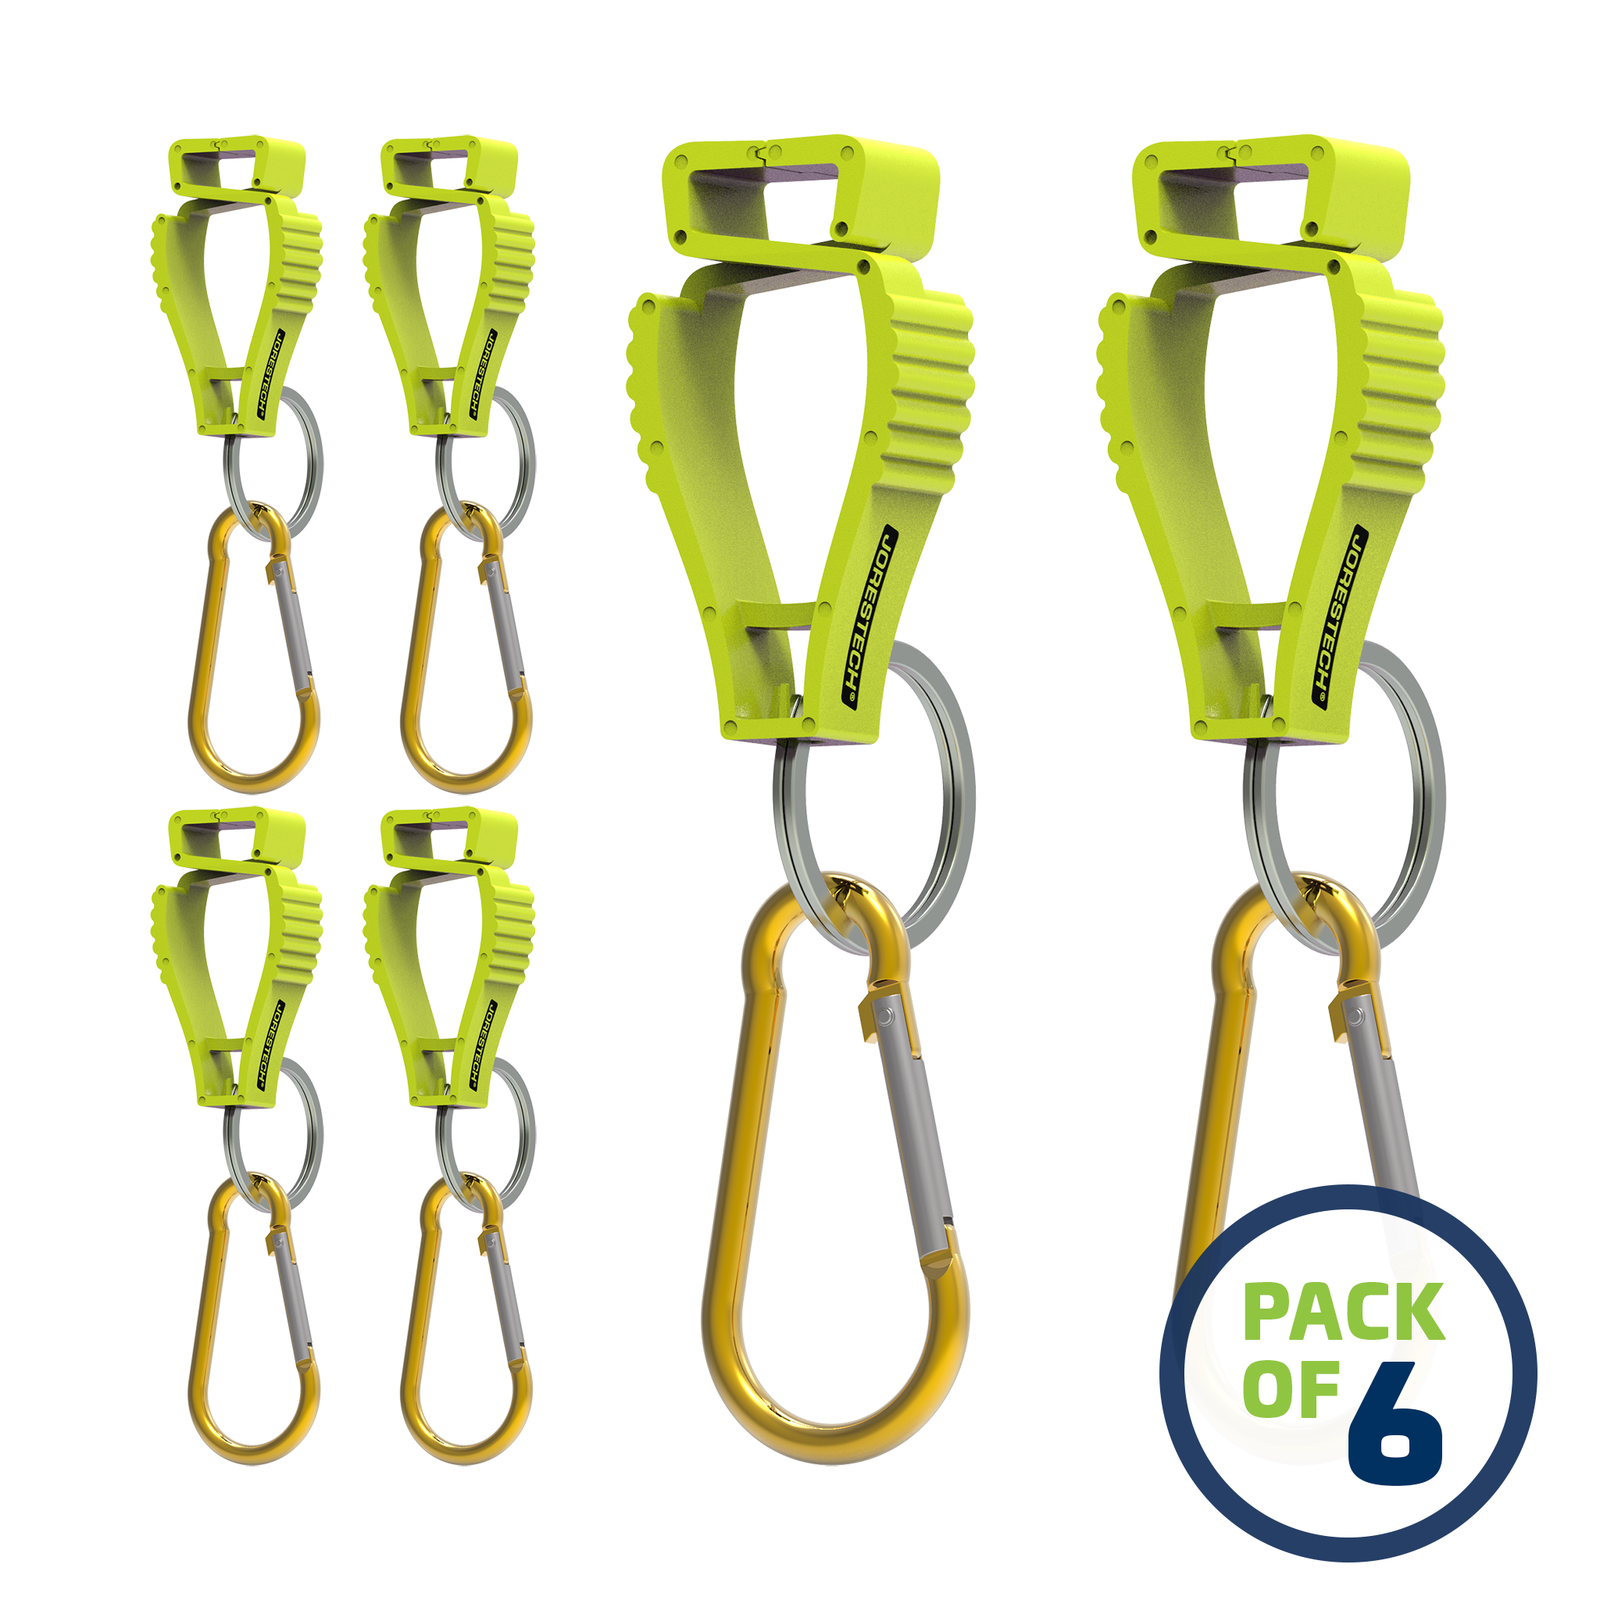 Pack of 6 Lime JORESTECH glove clip safety holders with carabiner